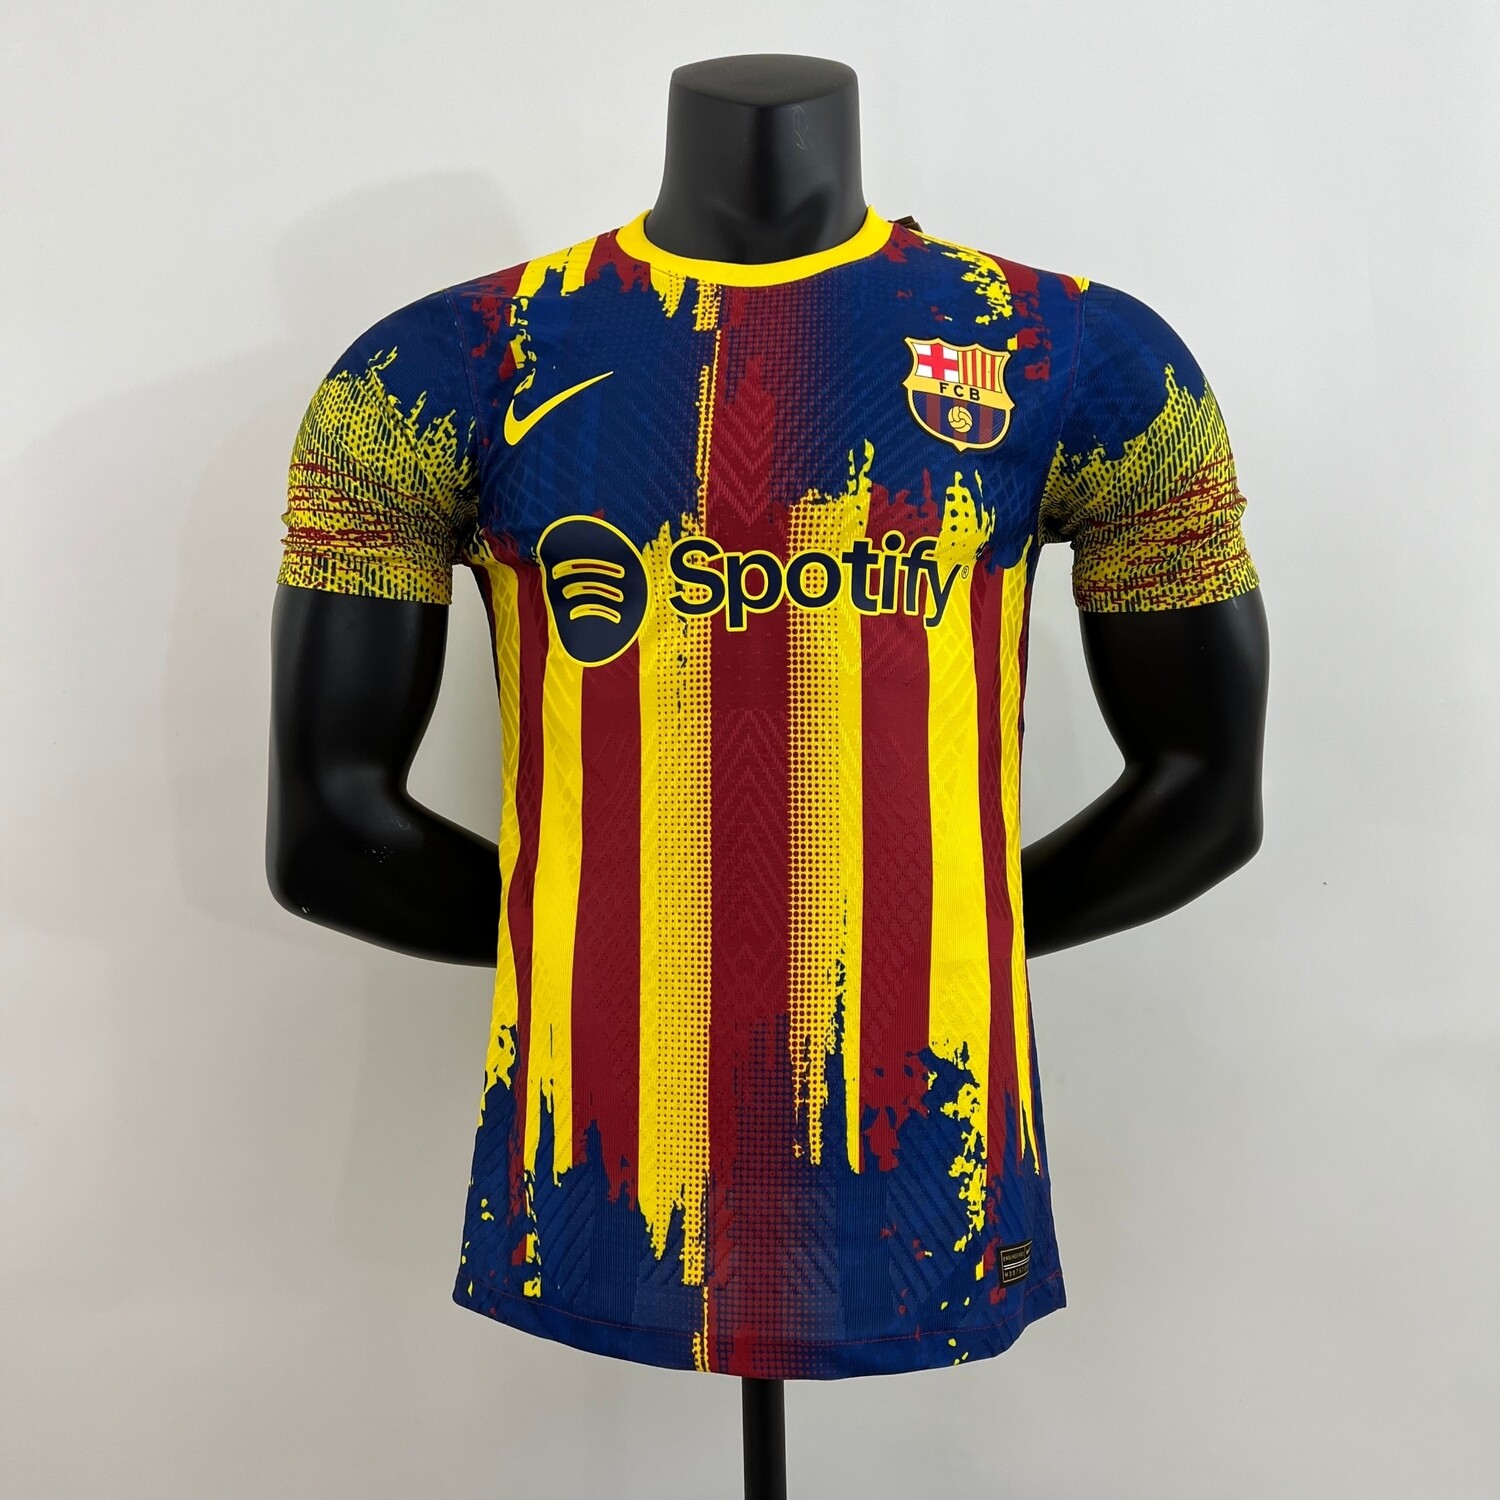 Barcelona Blue, Yellow and Red Art Special Vapor Jersey